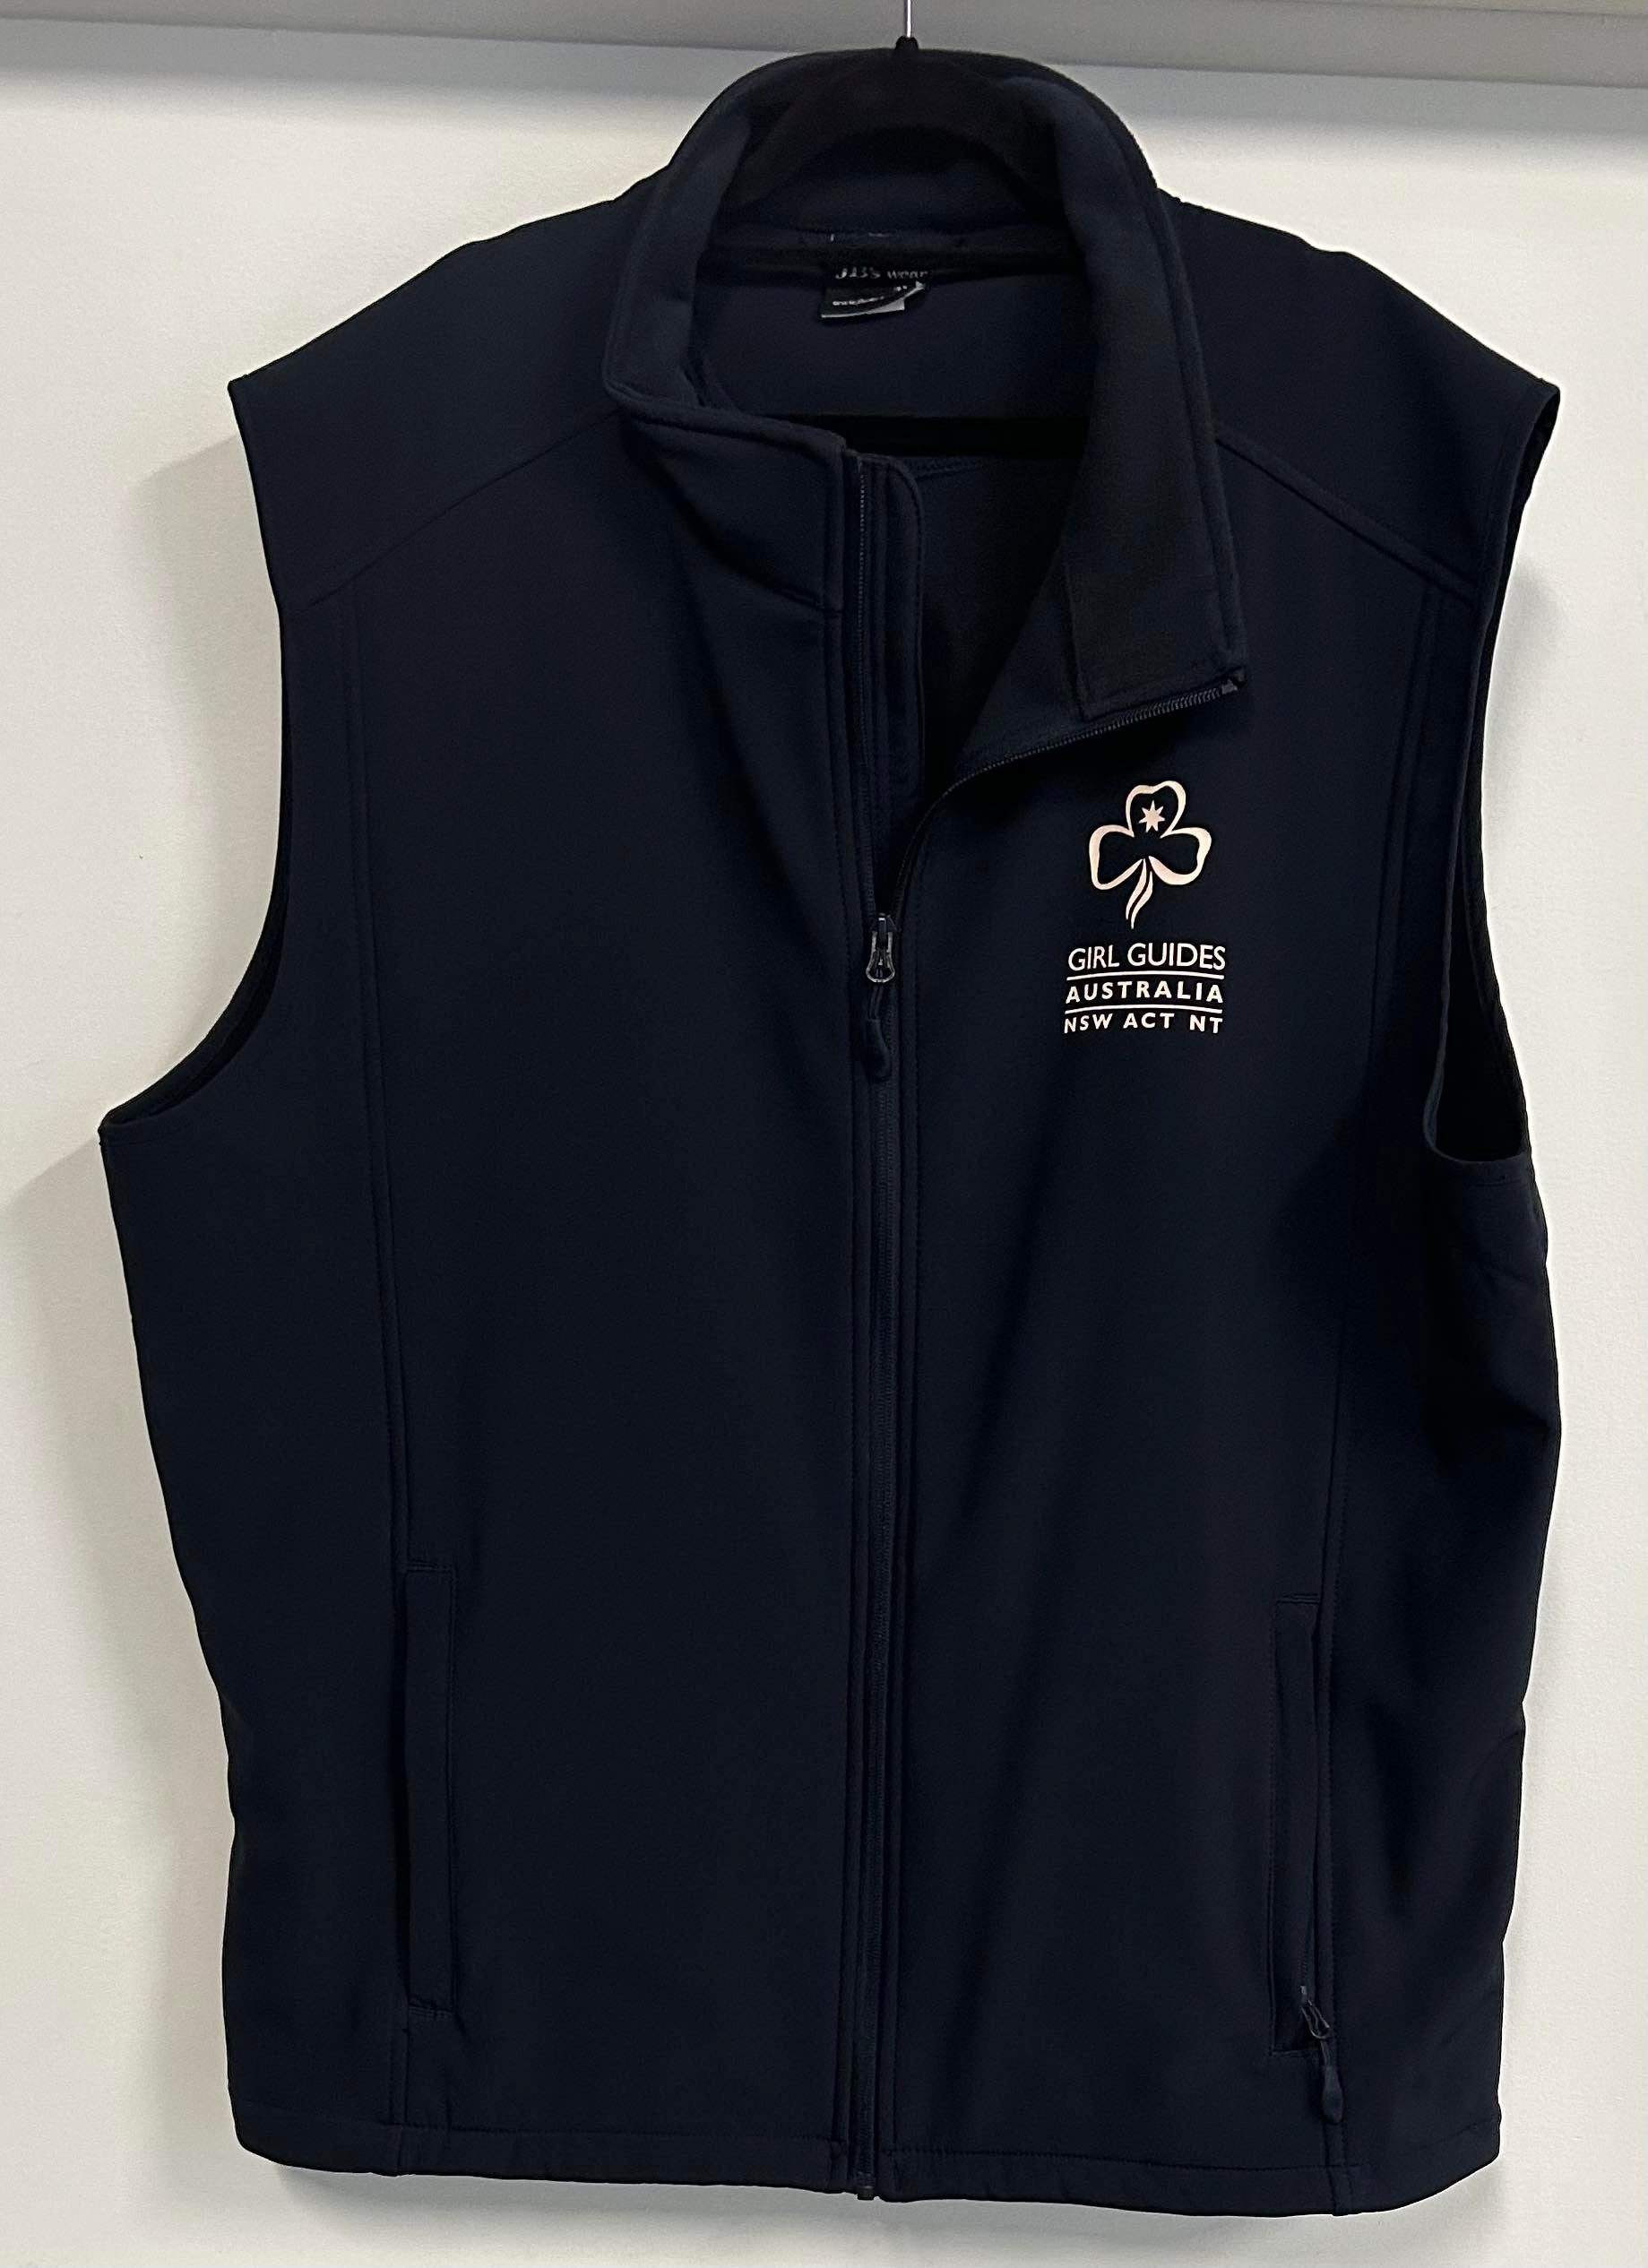 a navy blue soft shell zip up vest in size 3XL 